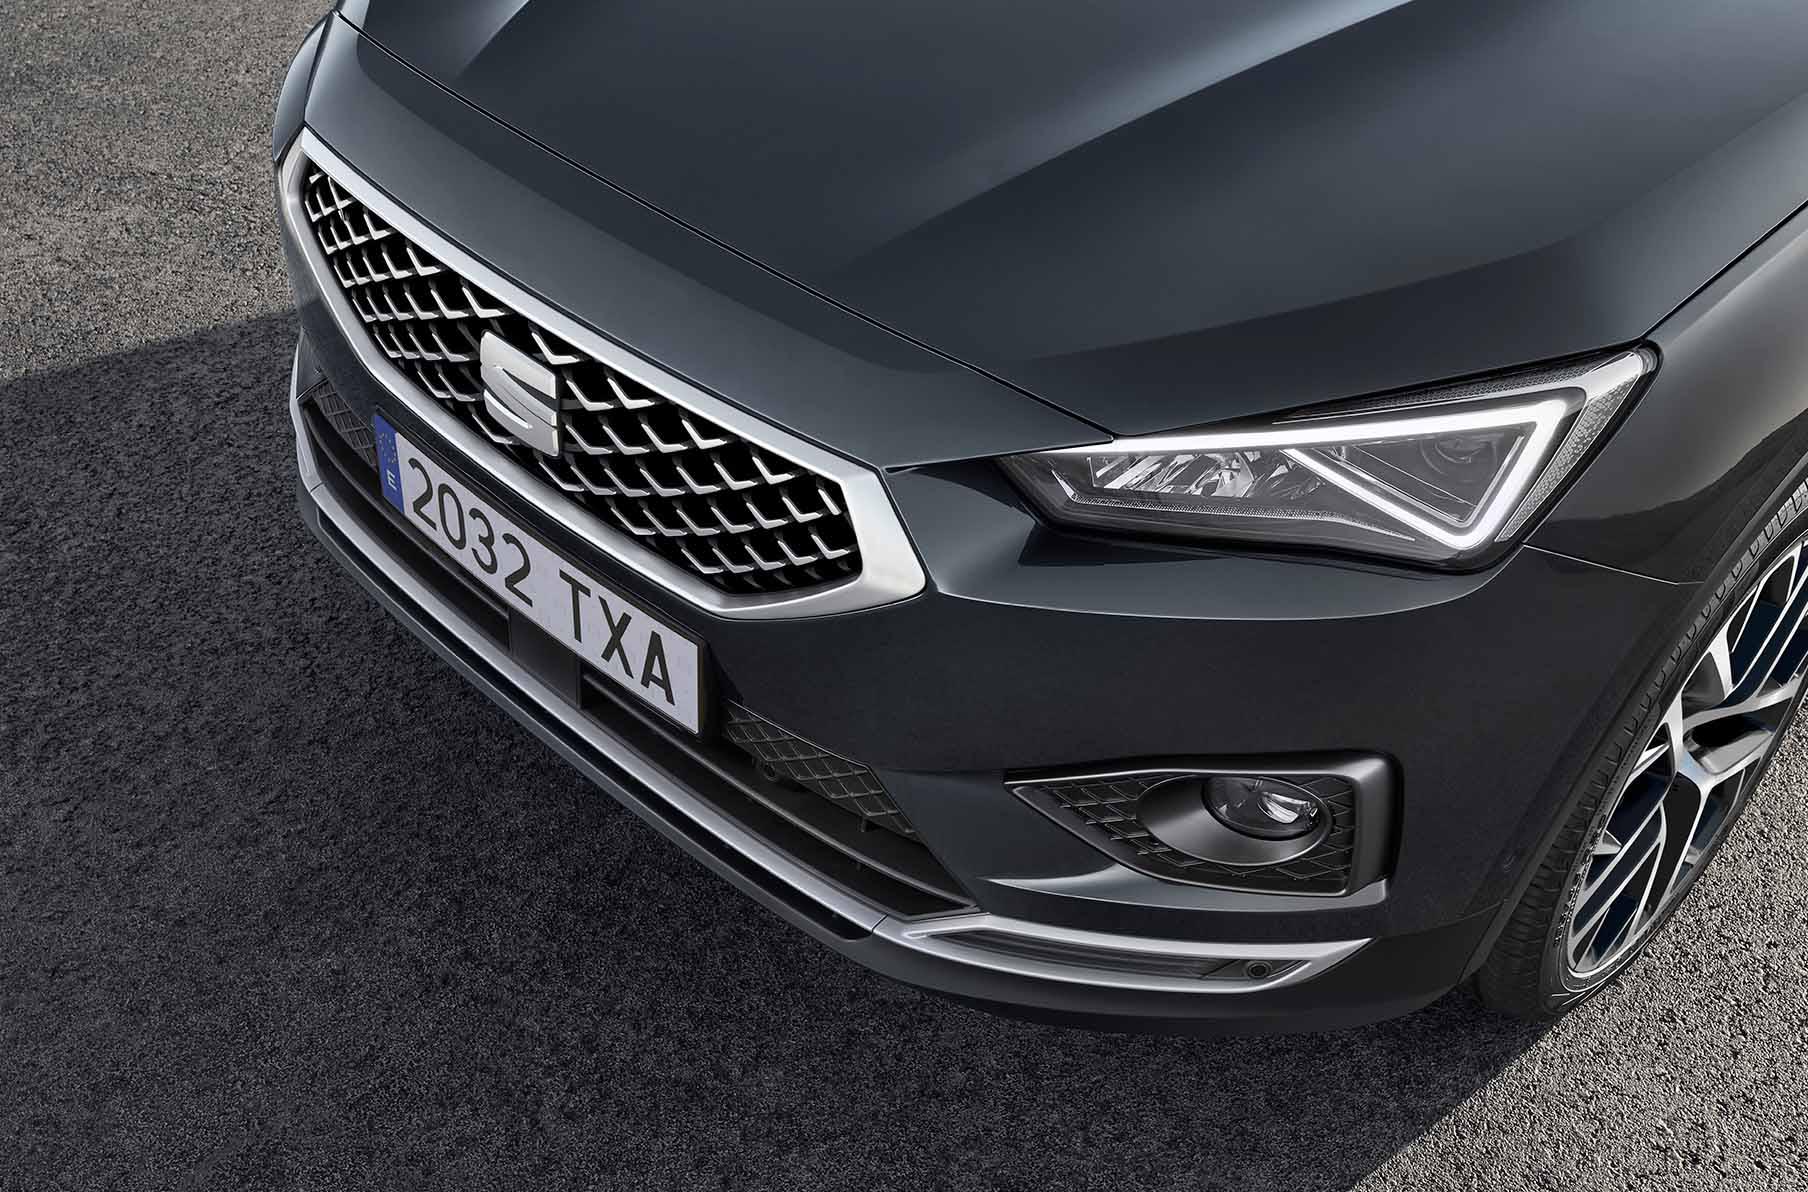 The SEAT Tarraco XPERIENCE bonnet design and front grille